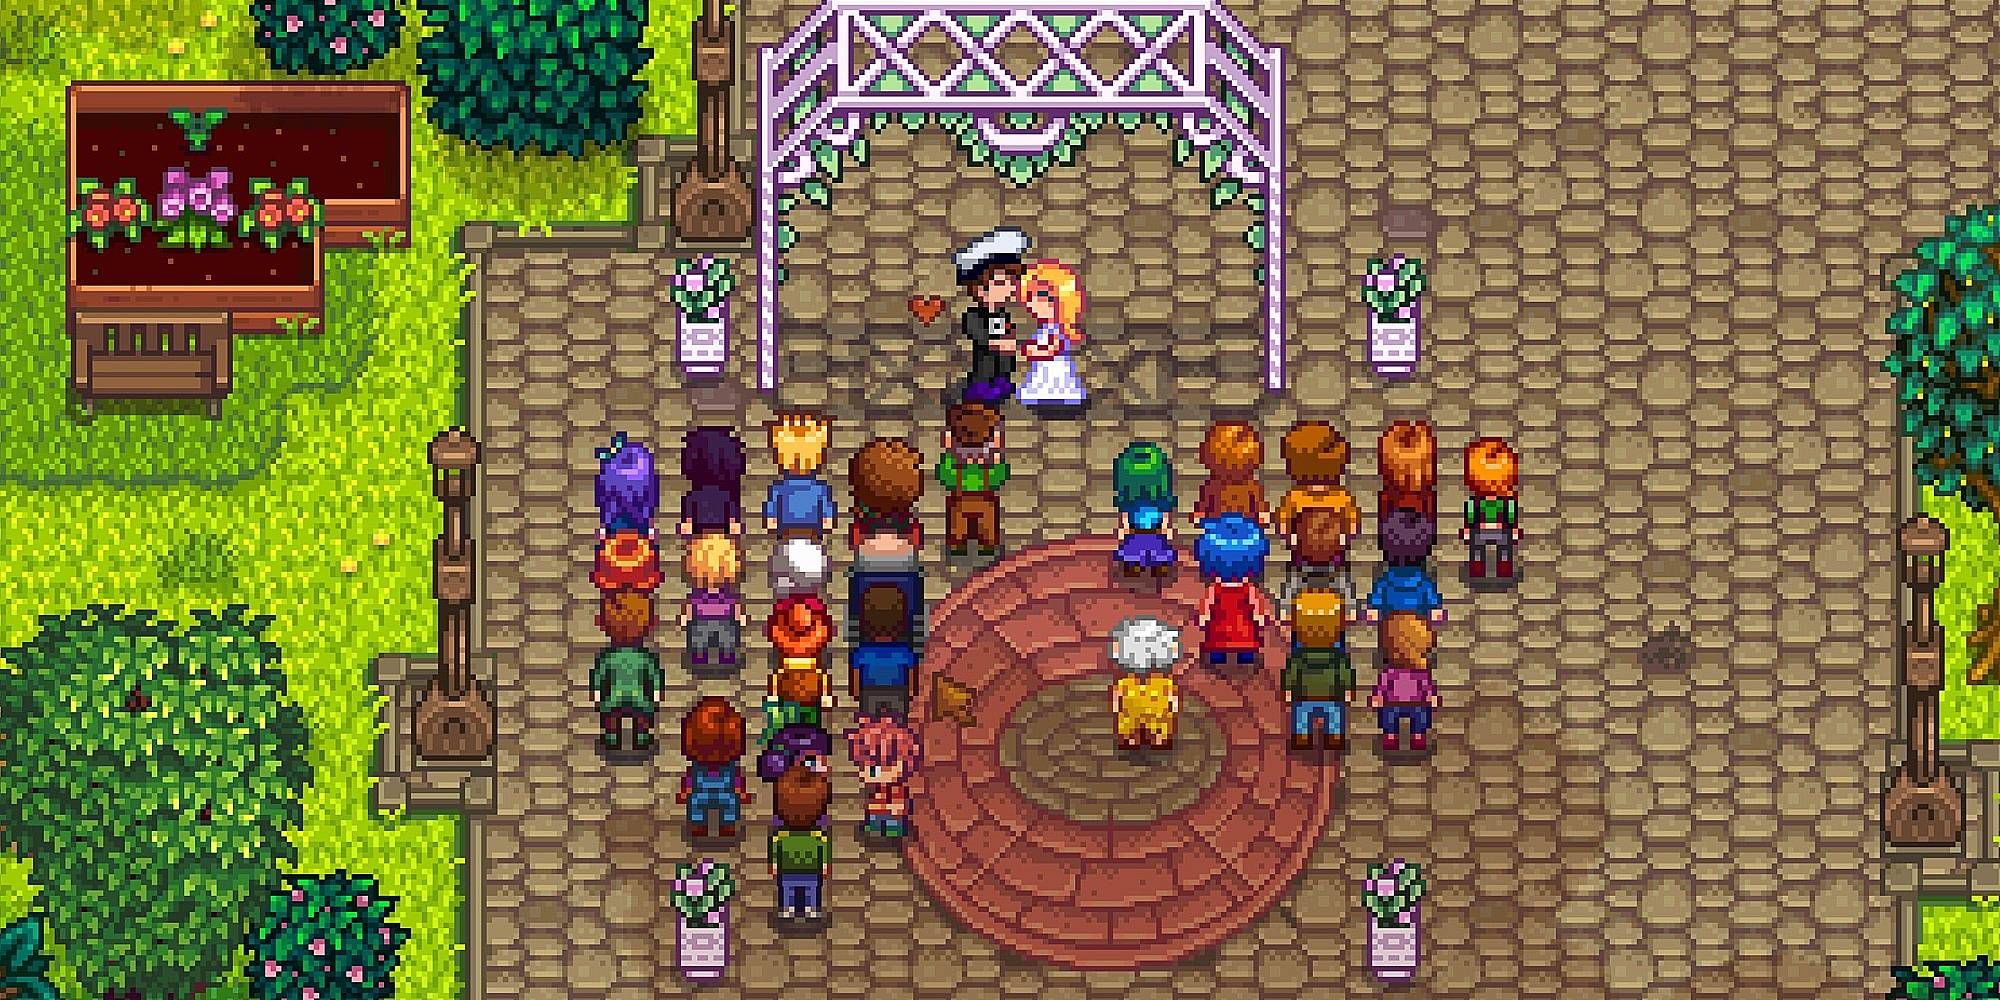 Numerous townspeople watch a wedding ceremony in Stardew Valley